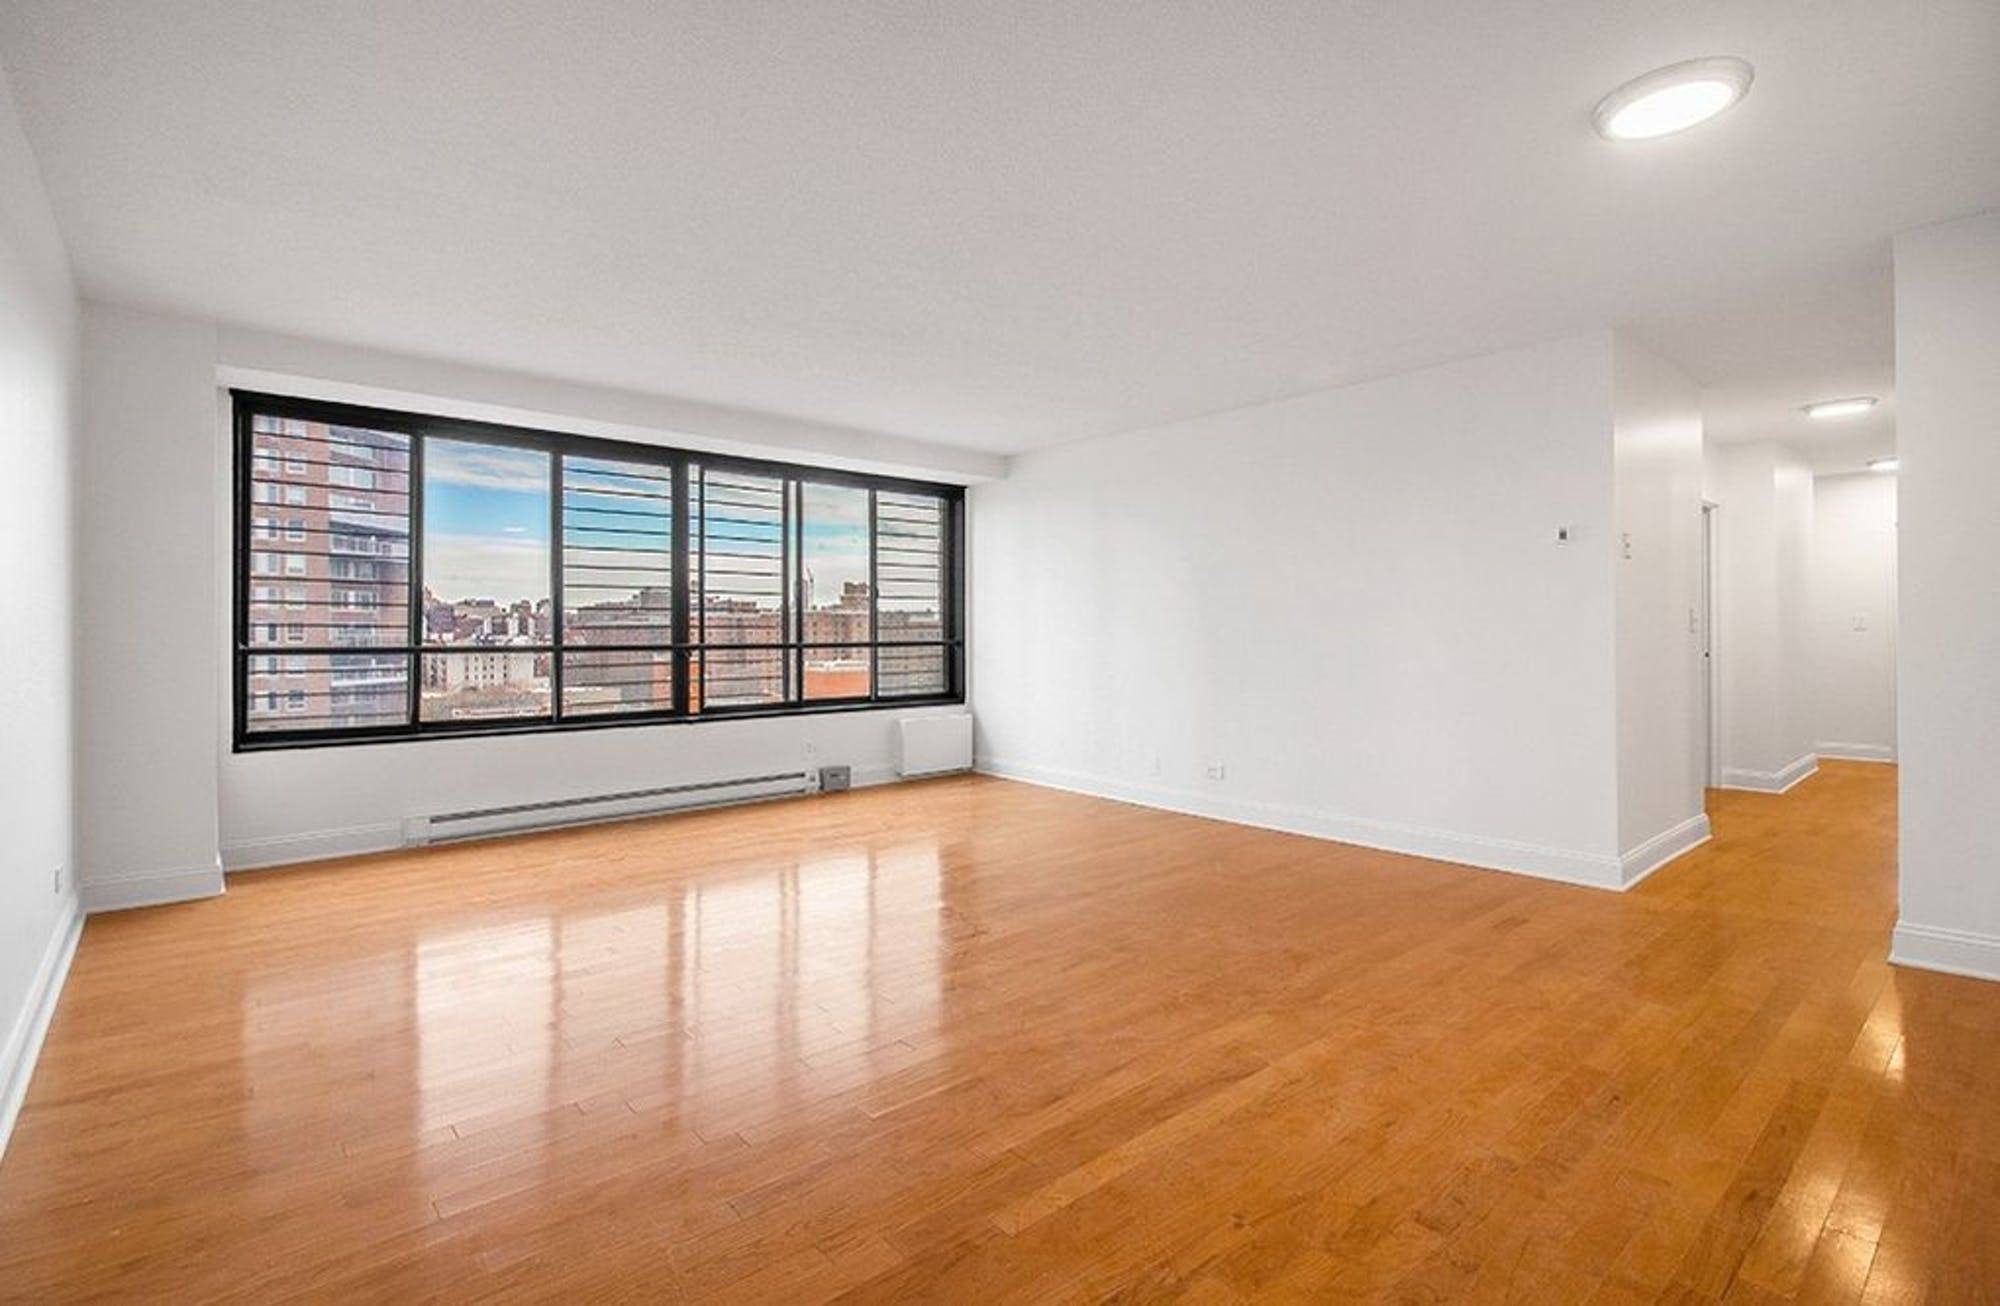 Showing Open House By APPOINTMENT ONLY Contact 24hrs in advance to coordinate and register appointment Video tour available upon request Apartment 8G is a truly unique Five Bedroom Apartment with ...